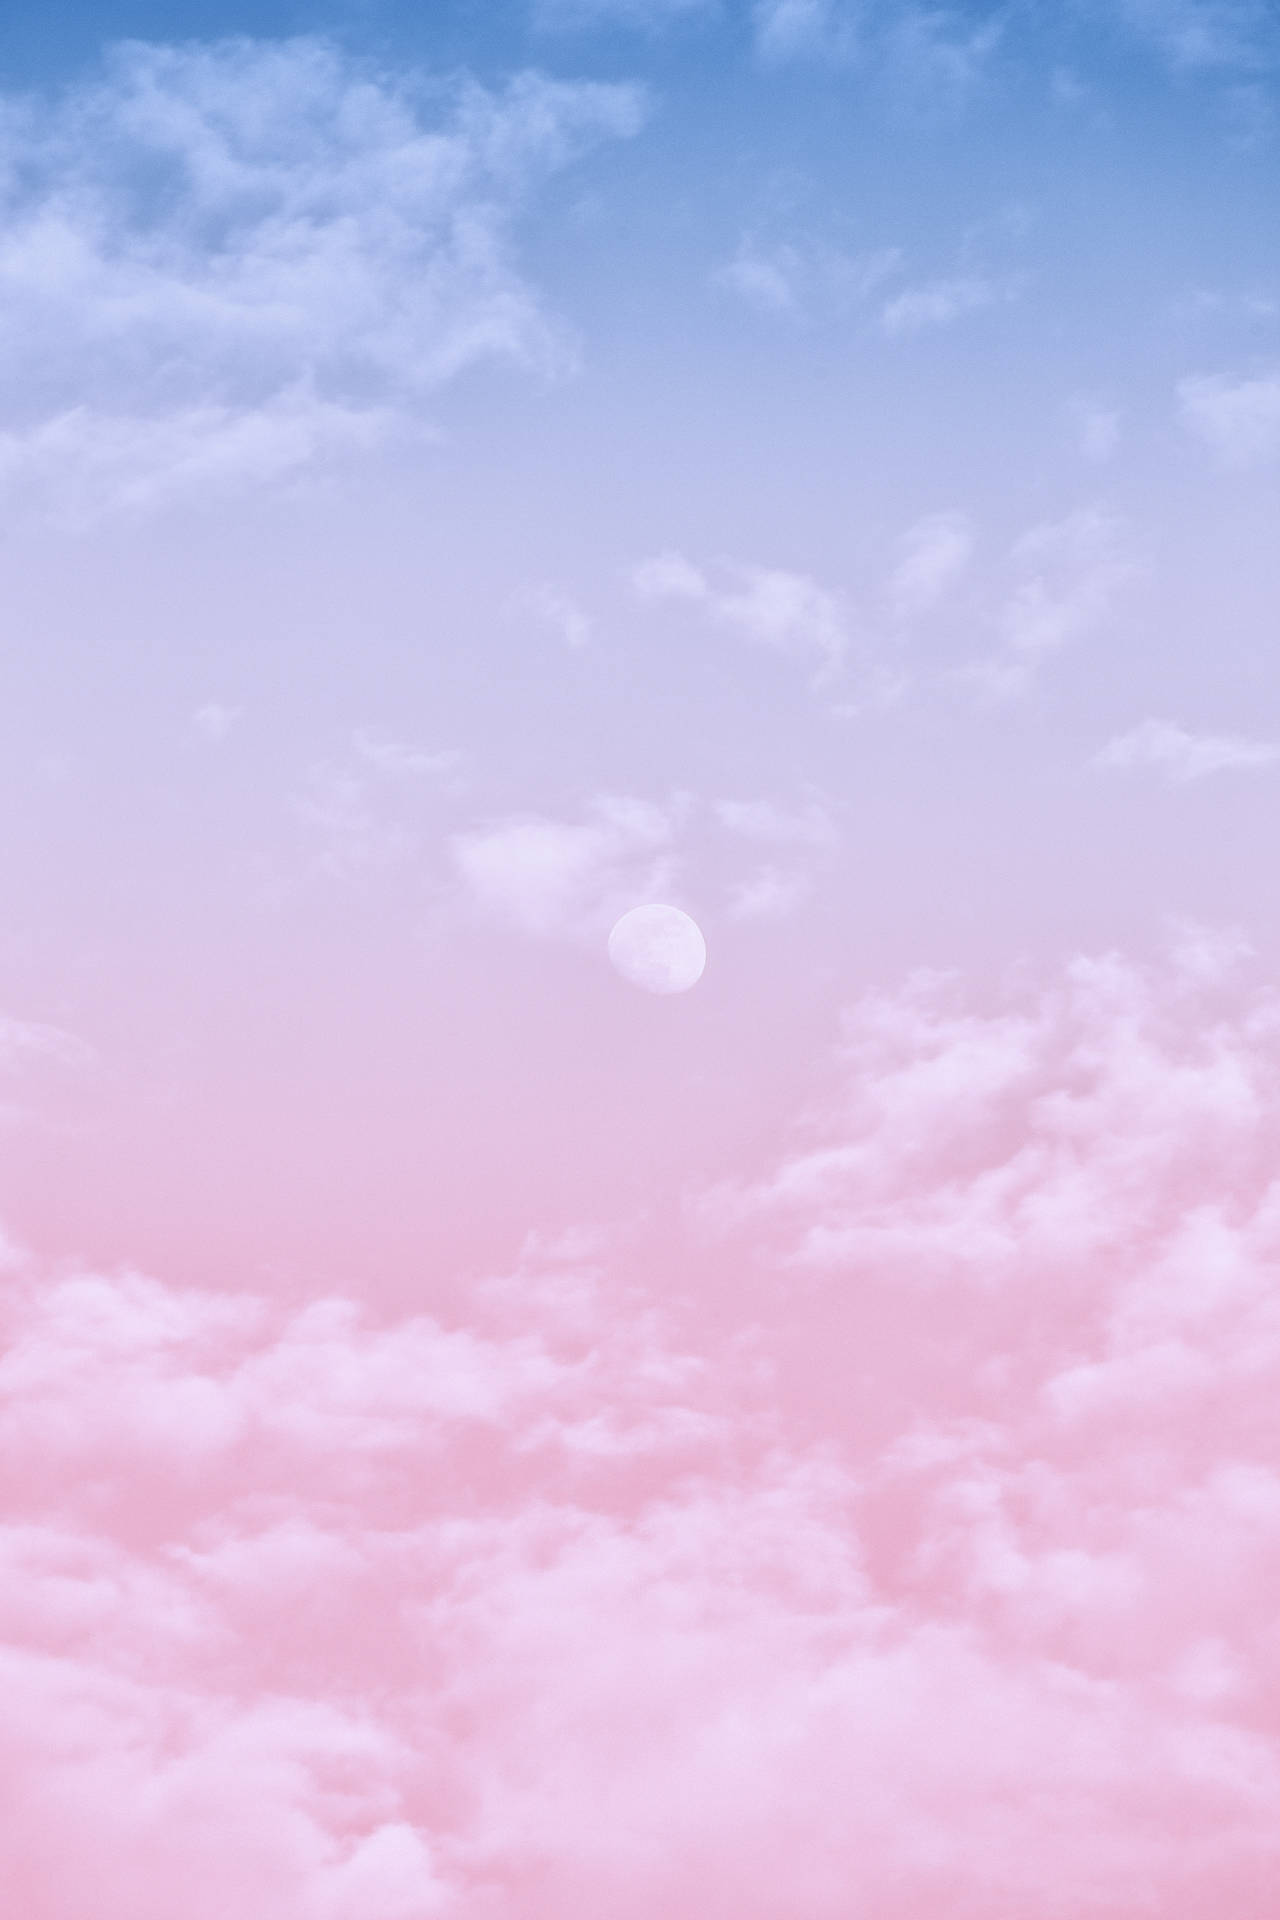 Pink Sky 4k Iphone 6 Plus Background